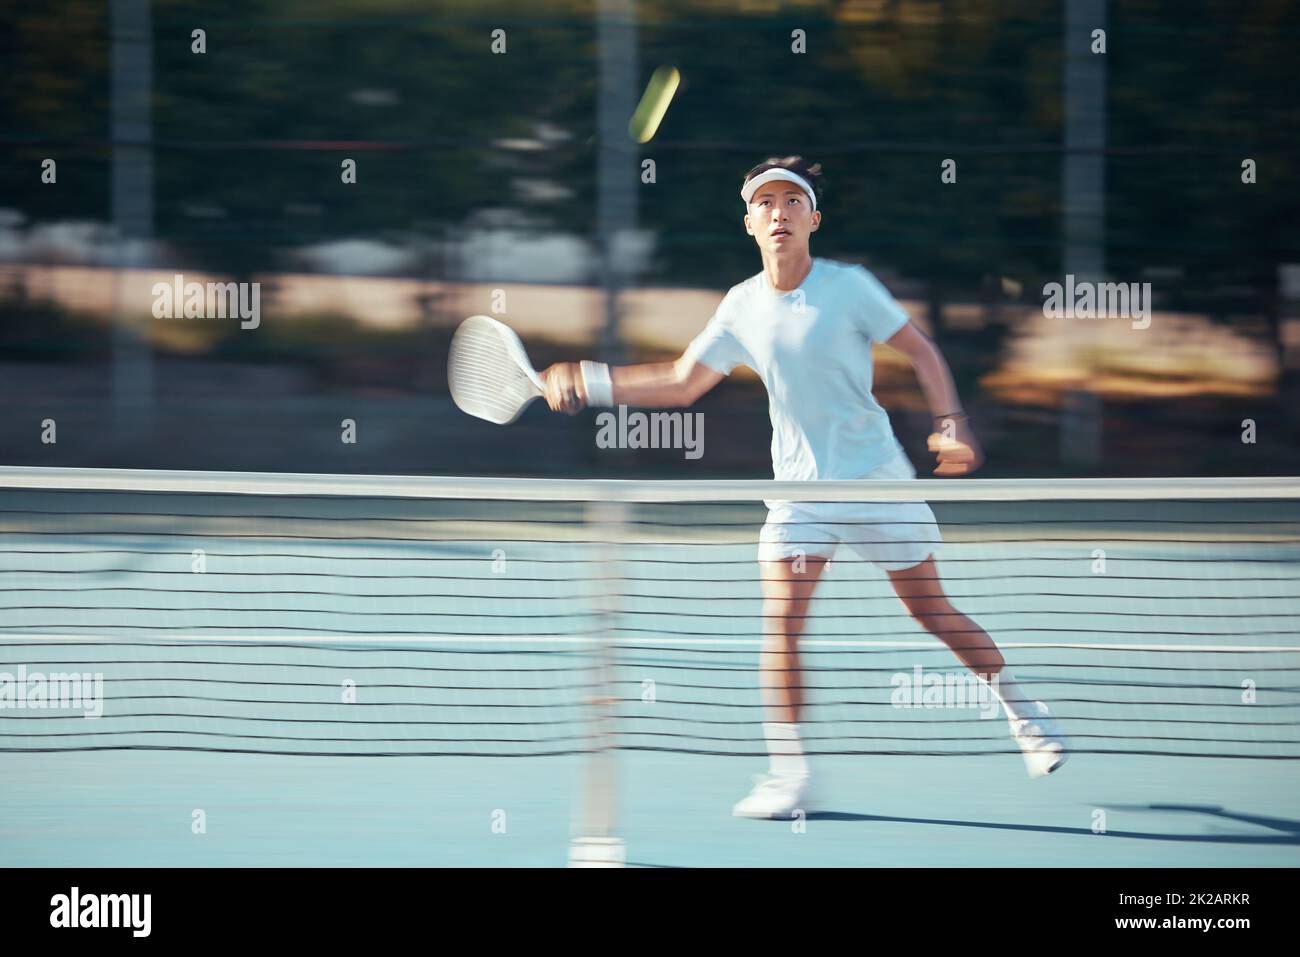 Asian tennis professional training with a racket and playing a game on court. Fit athlete running during a match and play competitive sport workout Stock Photo